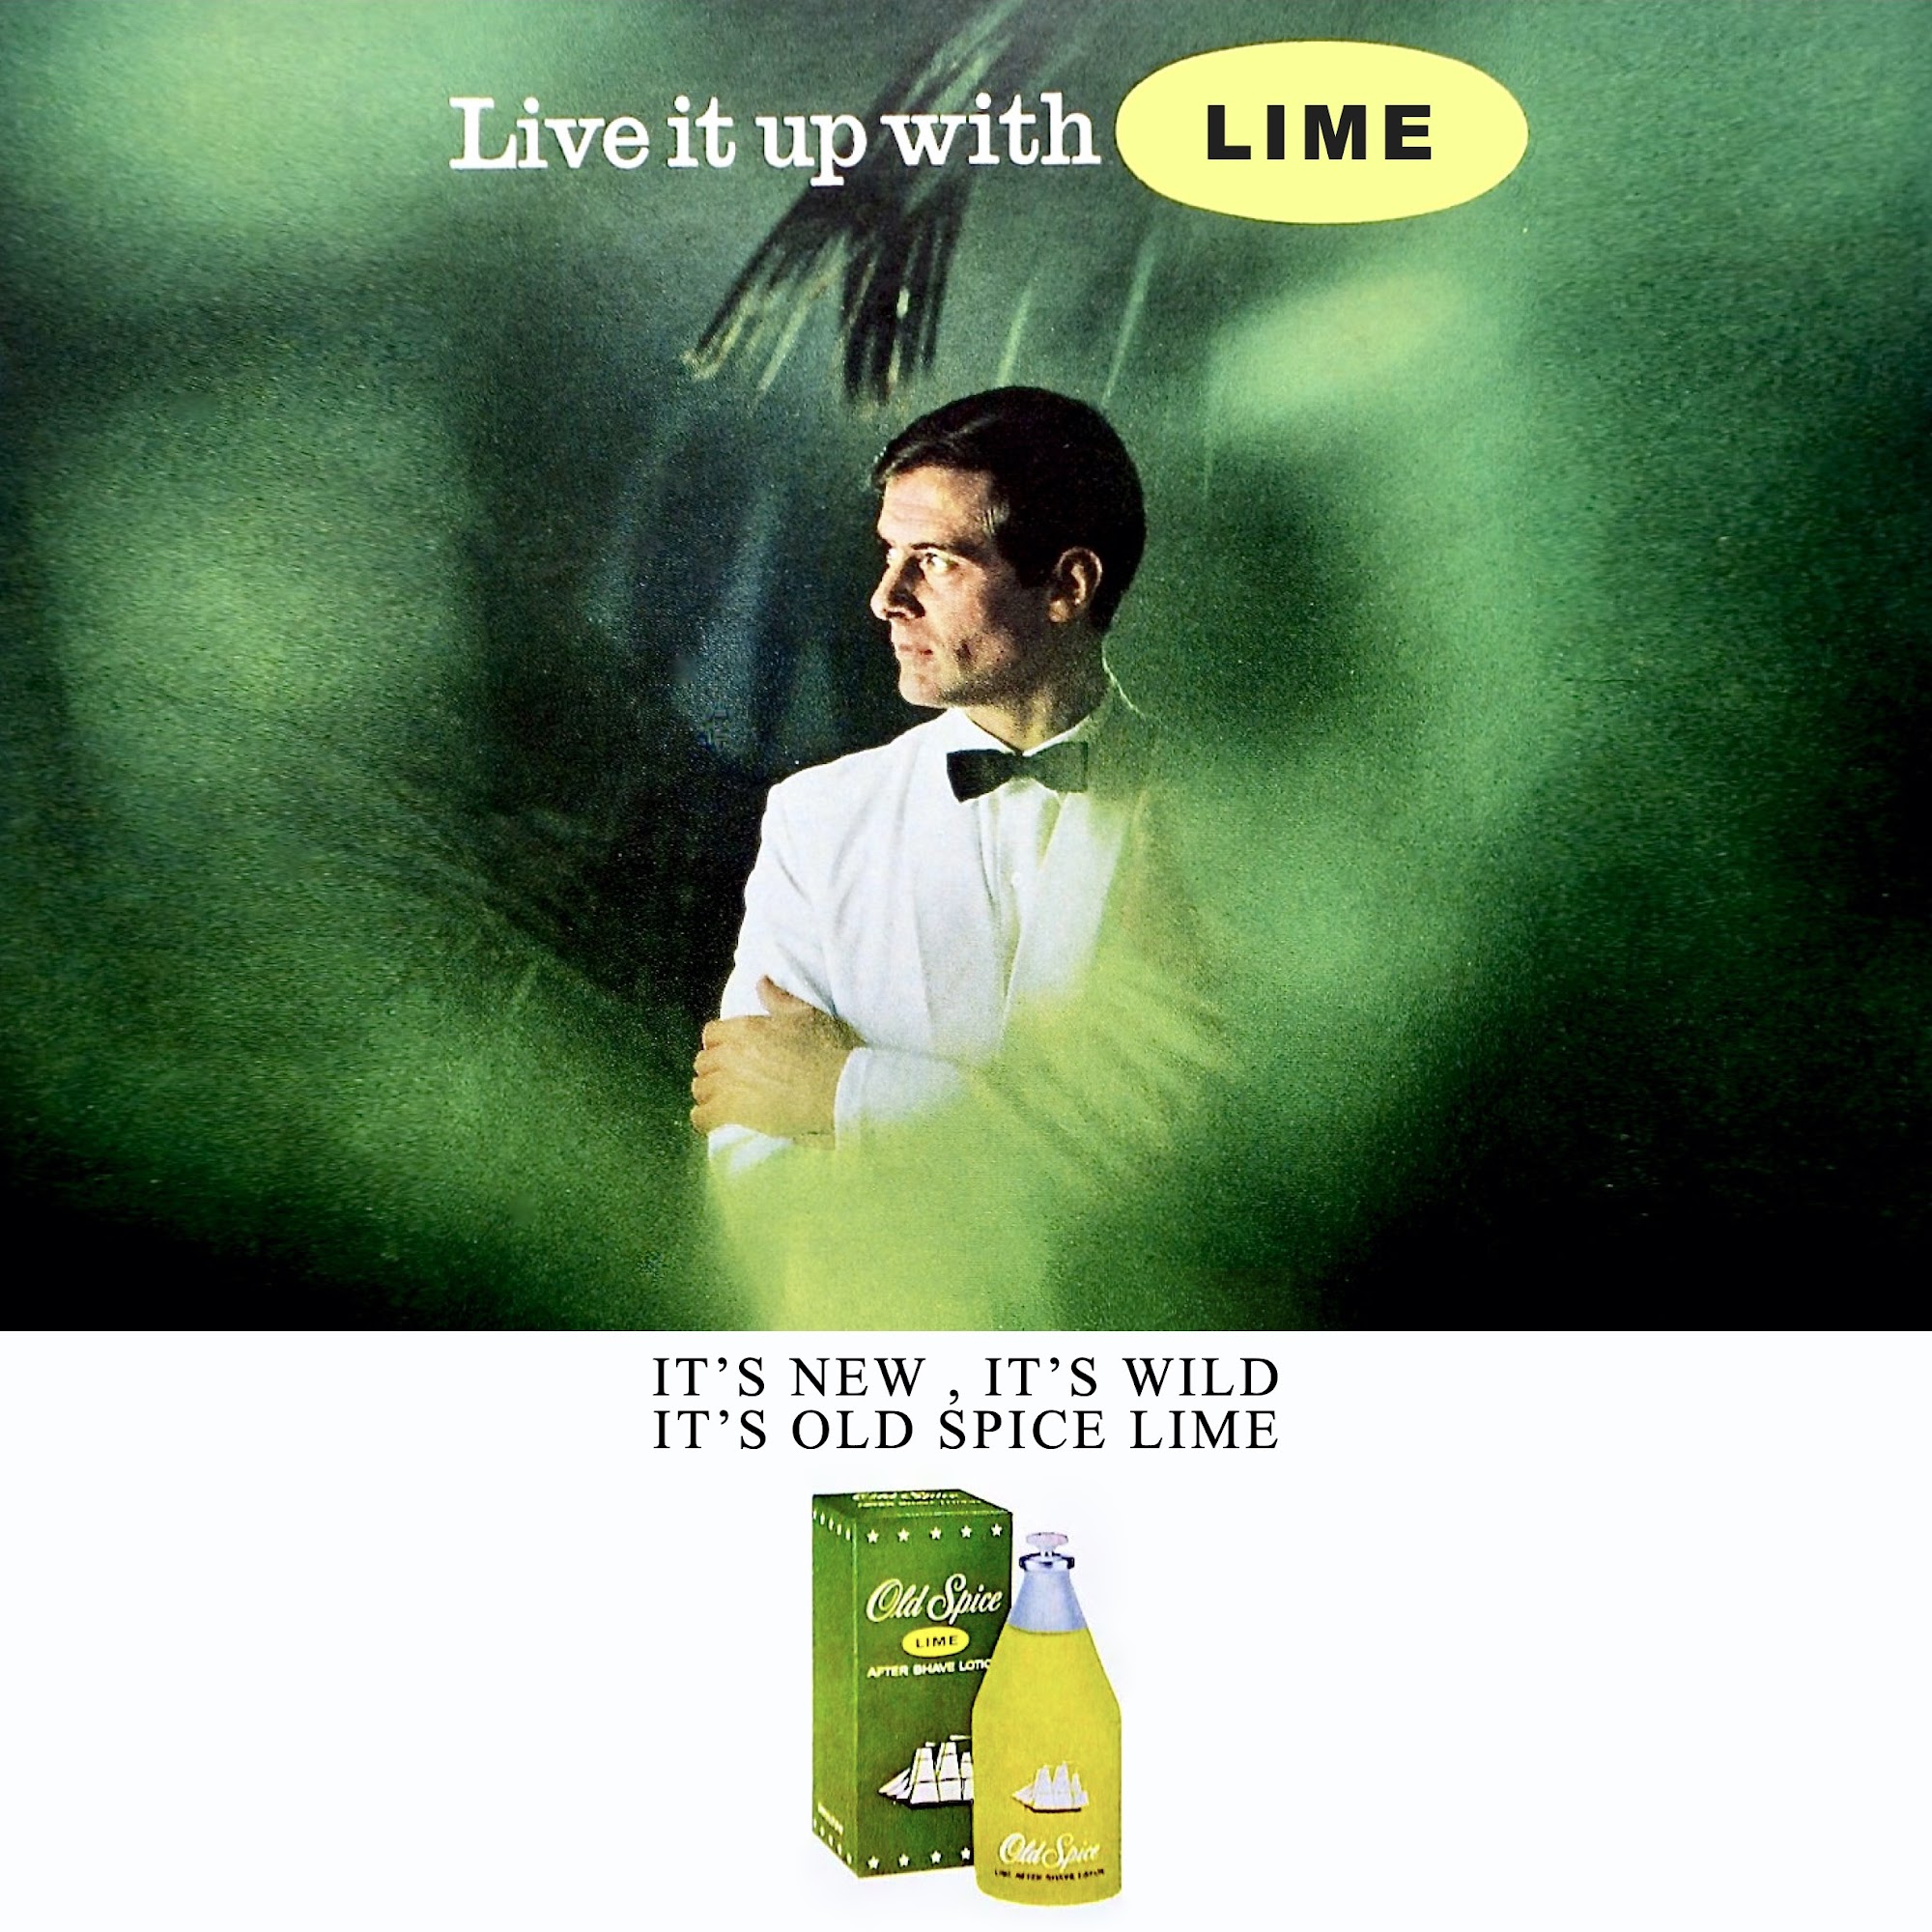 An advert for Old Spice Lime fragrance